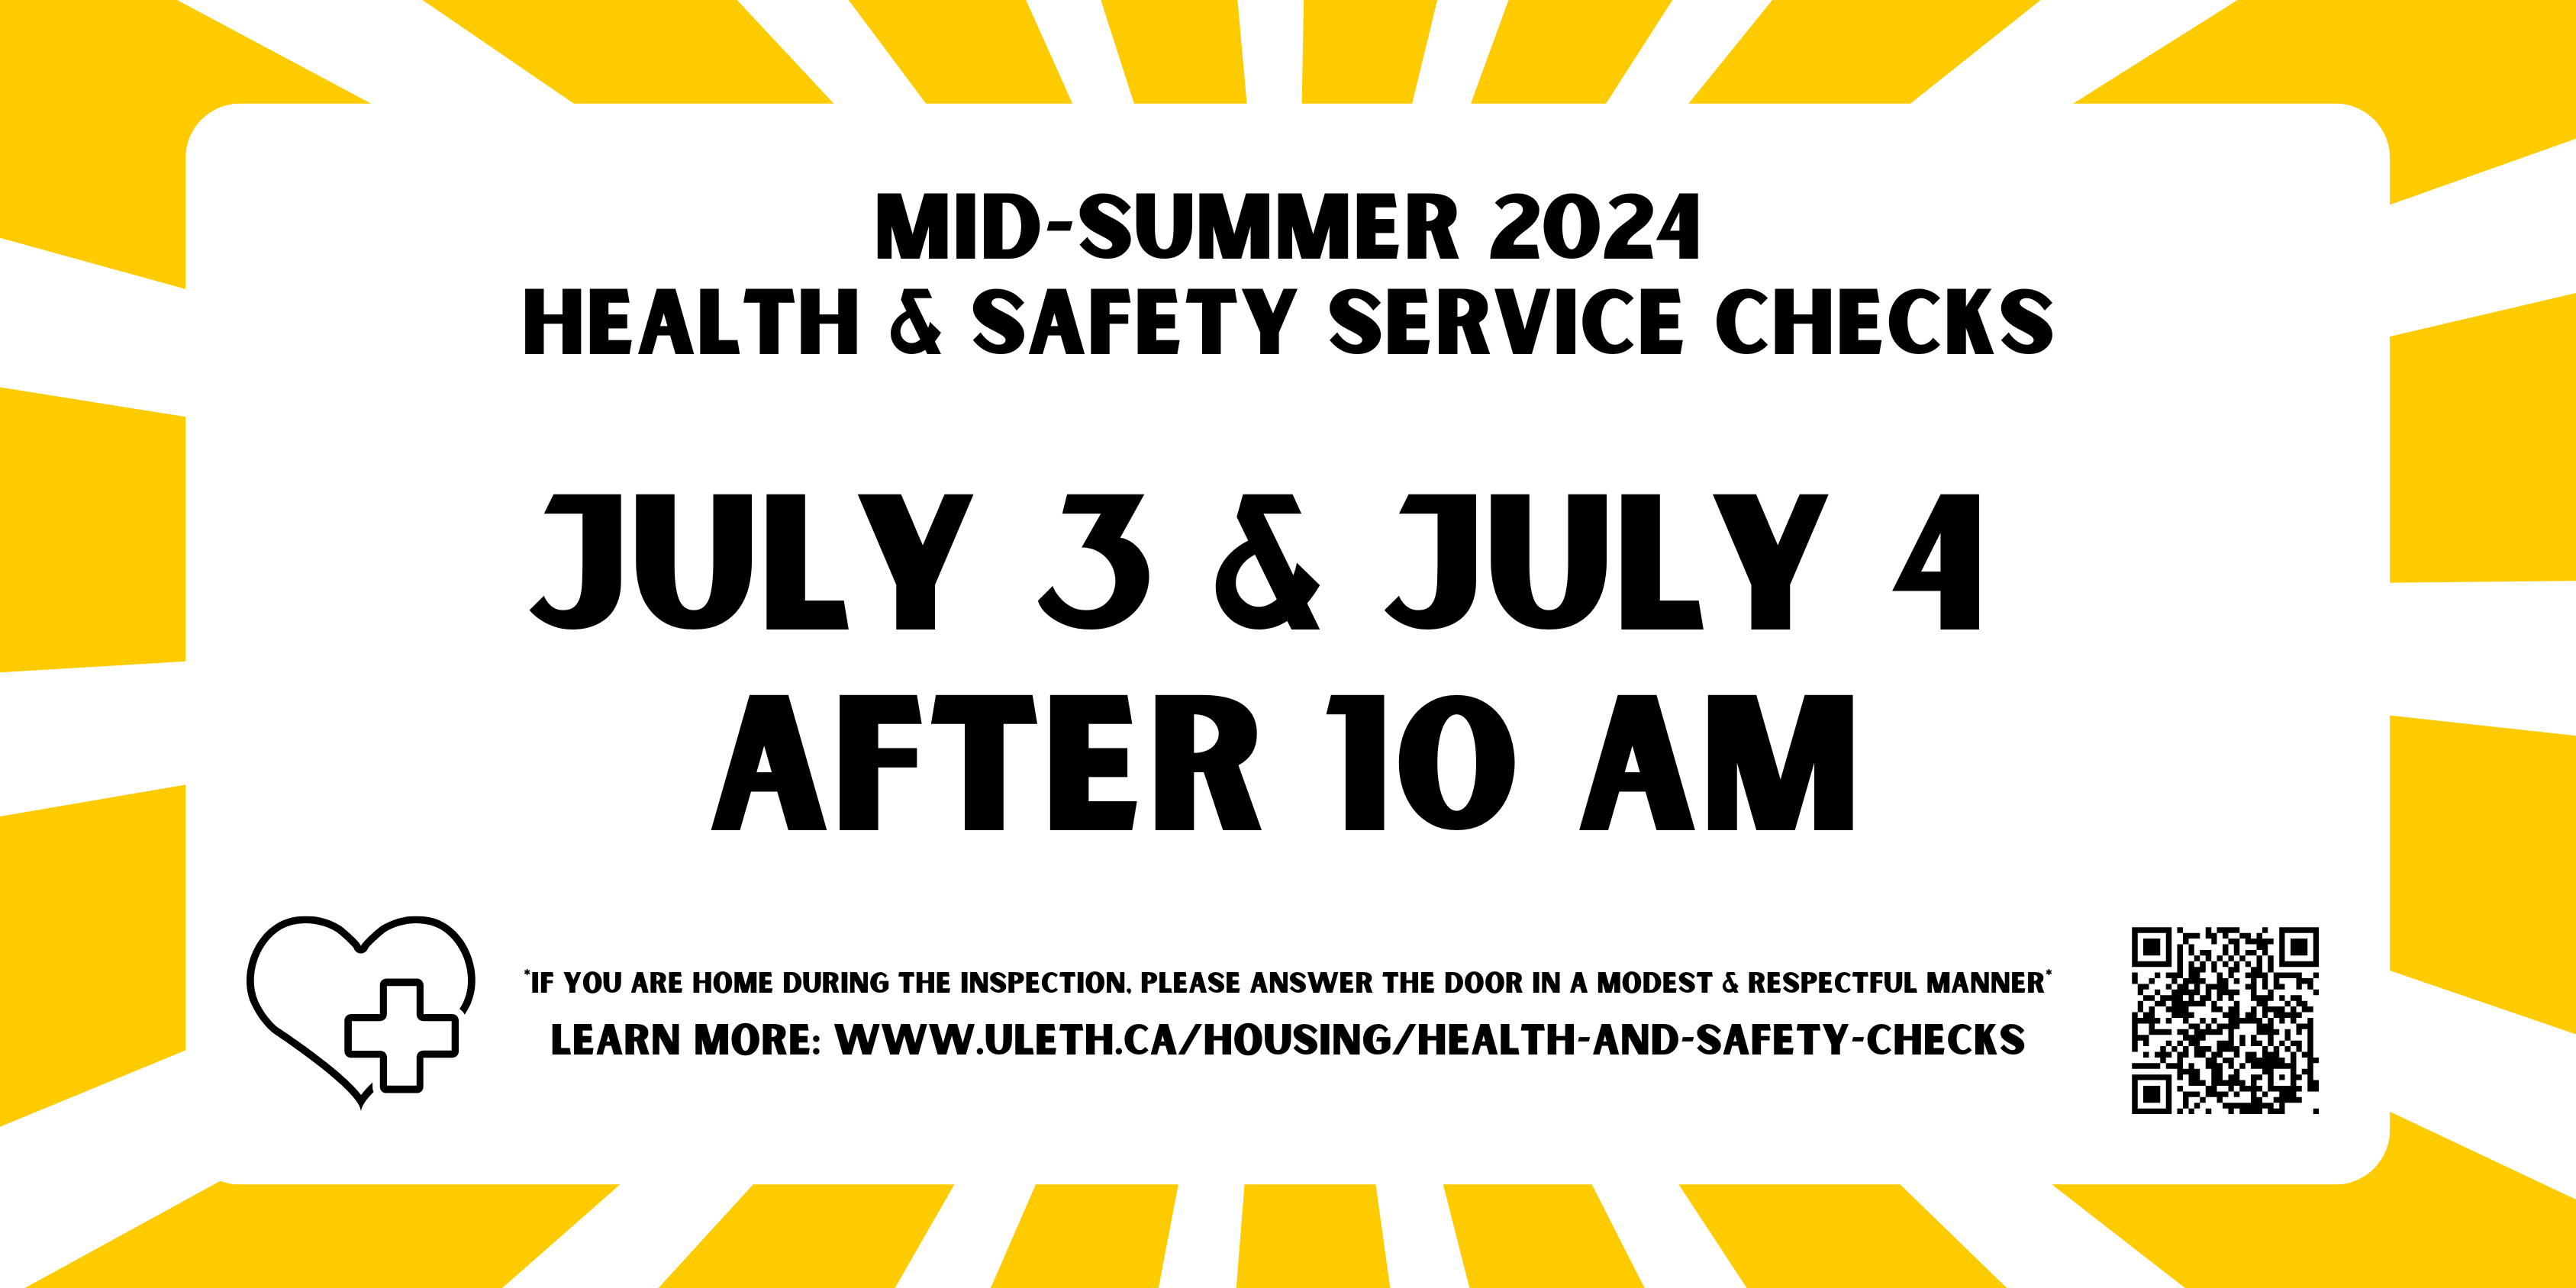 Mid-Summer 2024 Health & Safety Service Checks July 3 & 4 after 10 am.